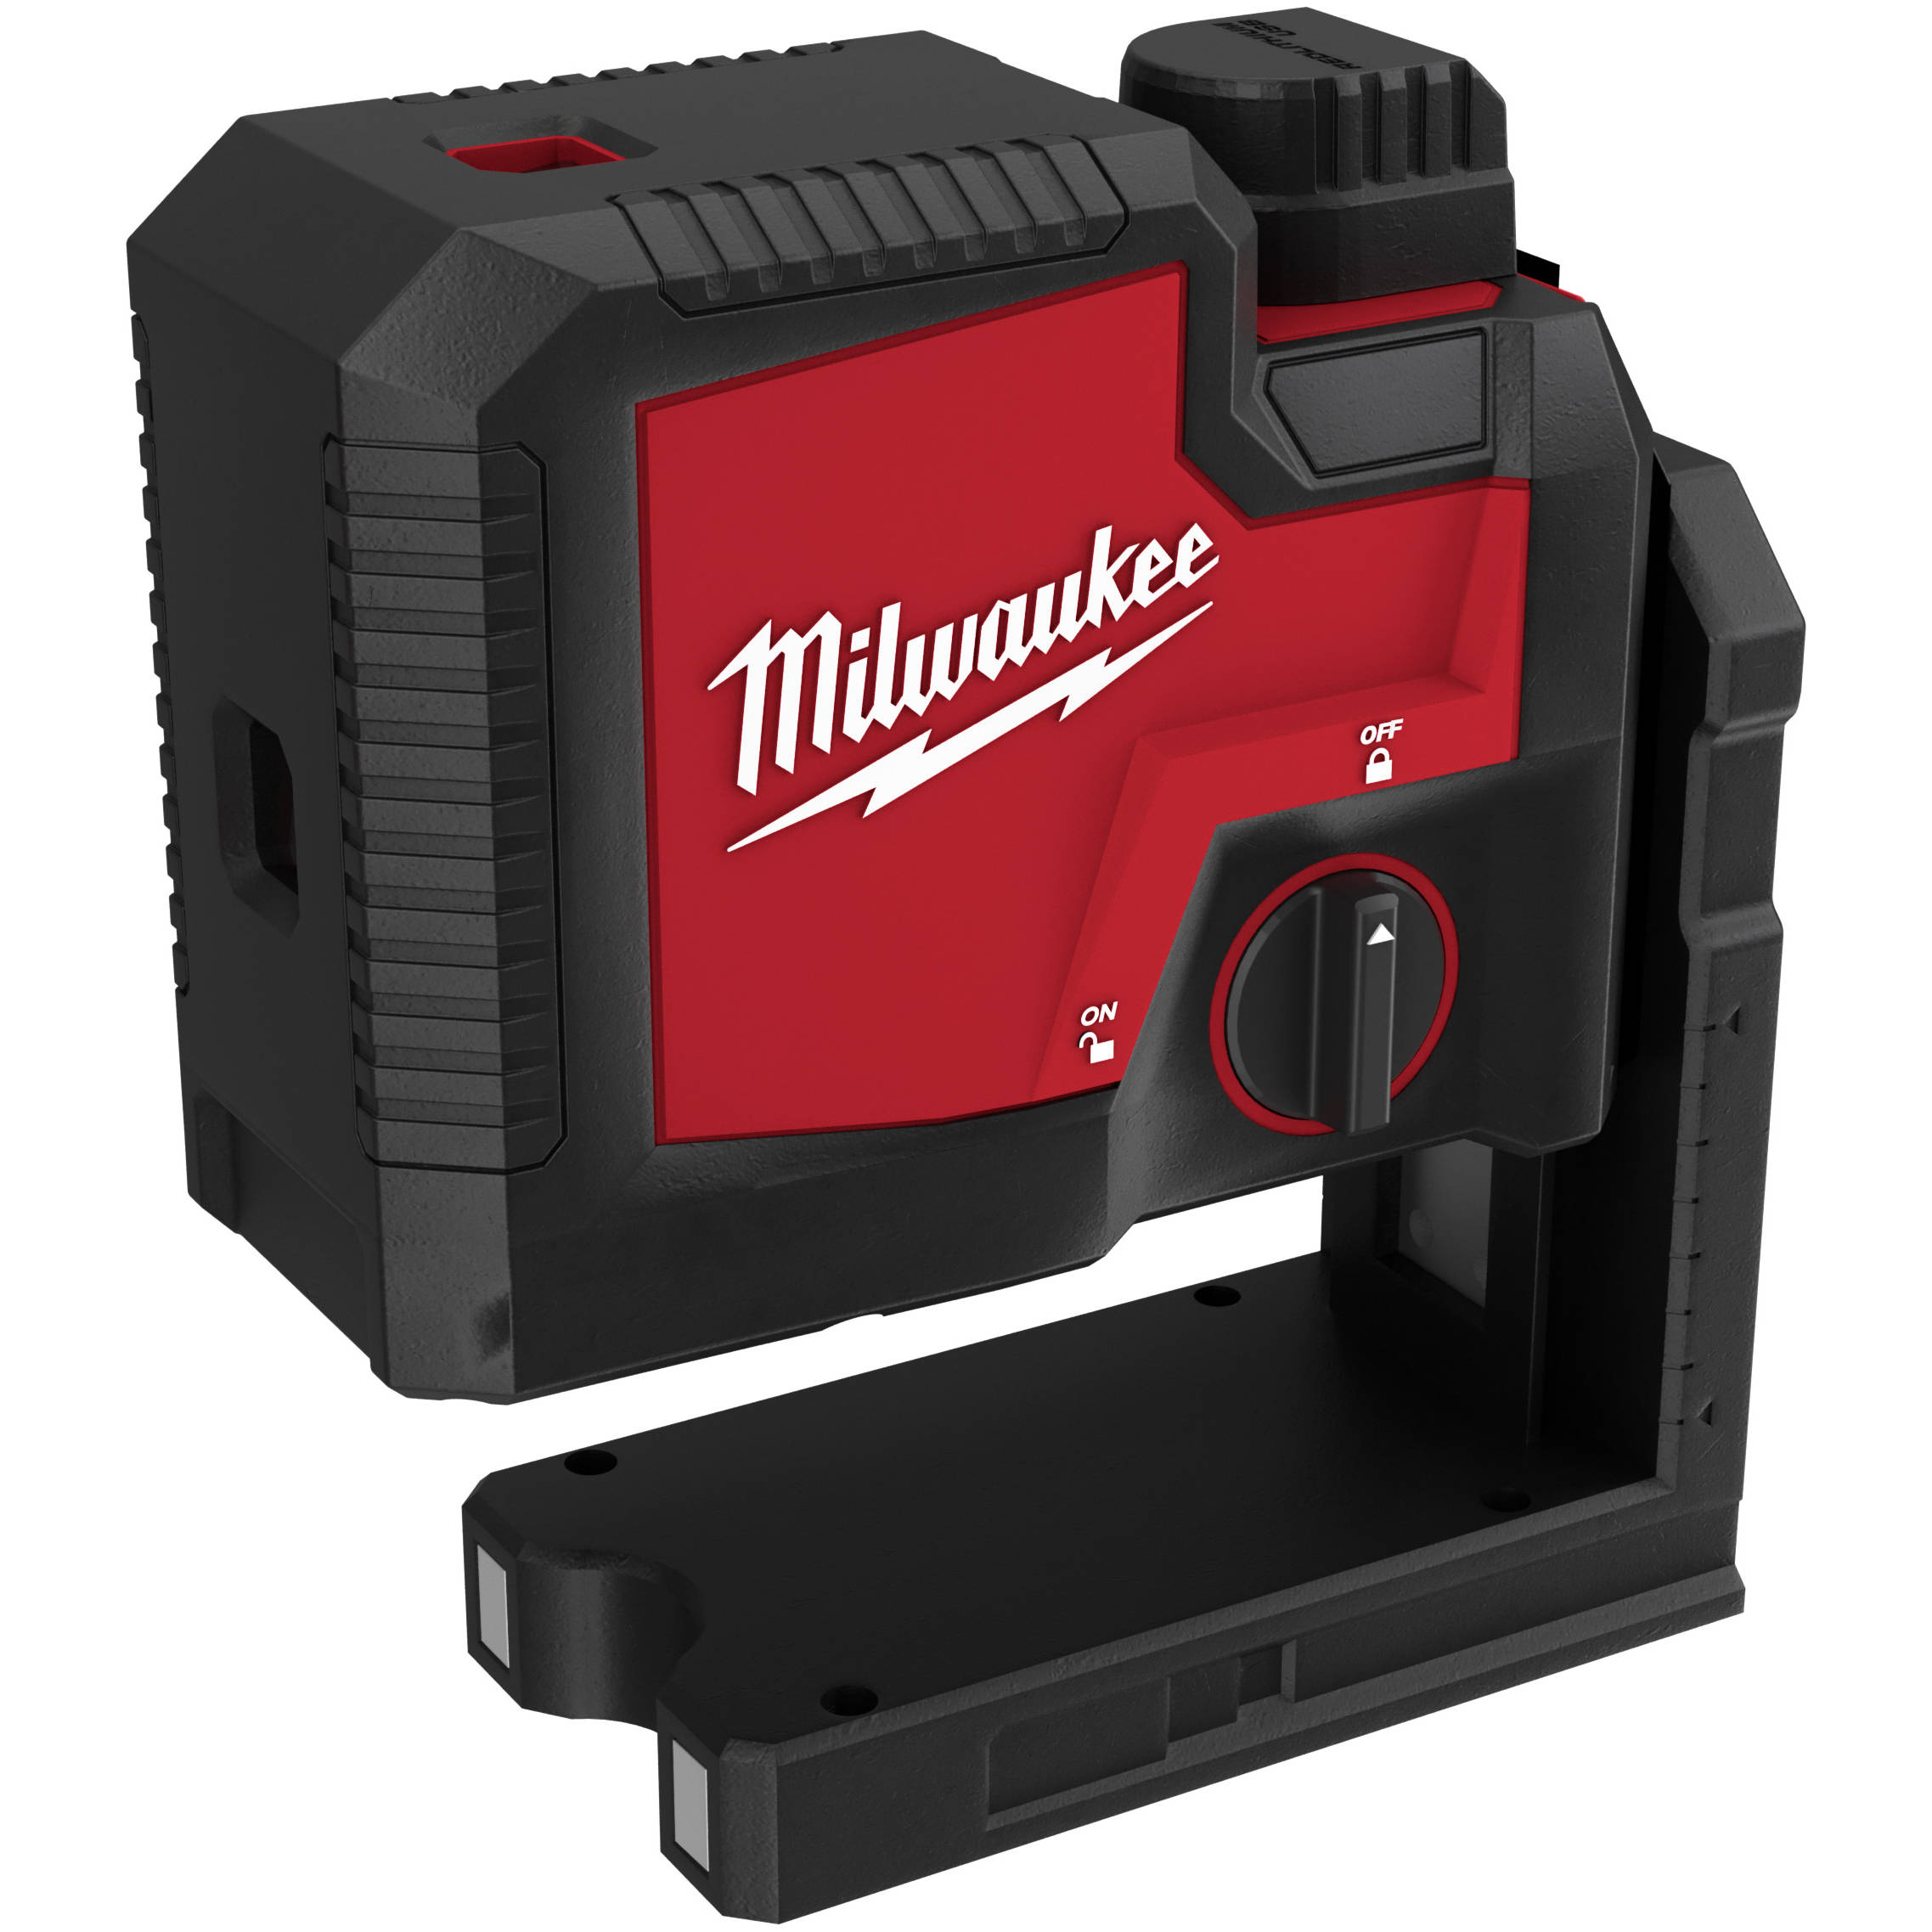 3510-21 Milwaukee USB Rechargeable Green 3-Point Laser 3